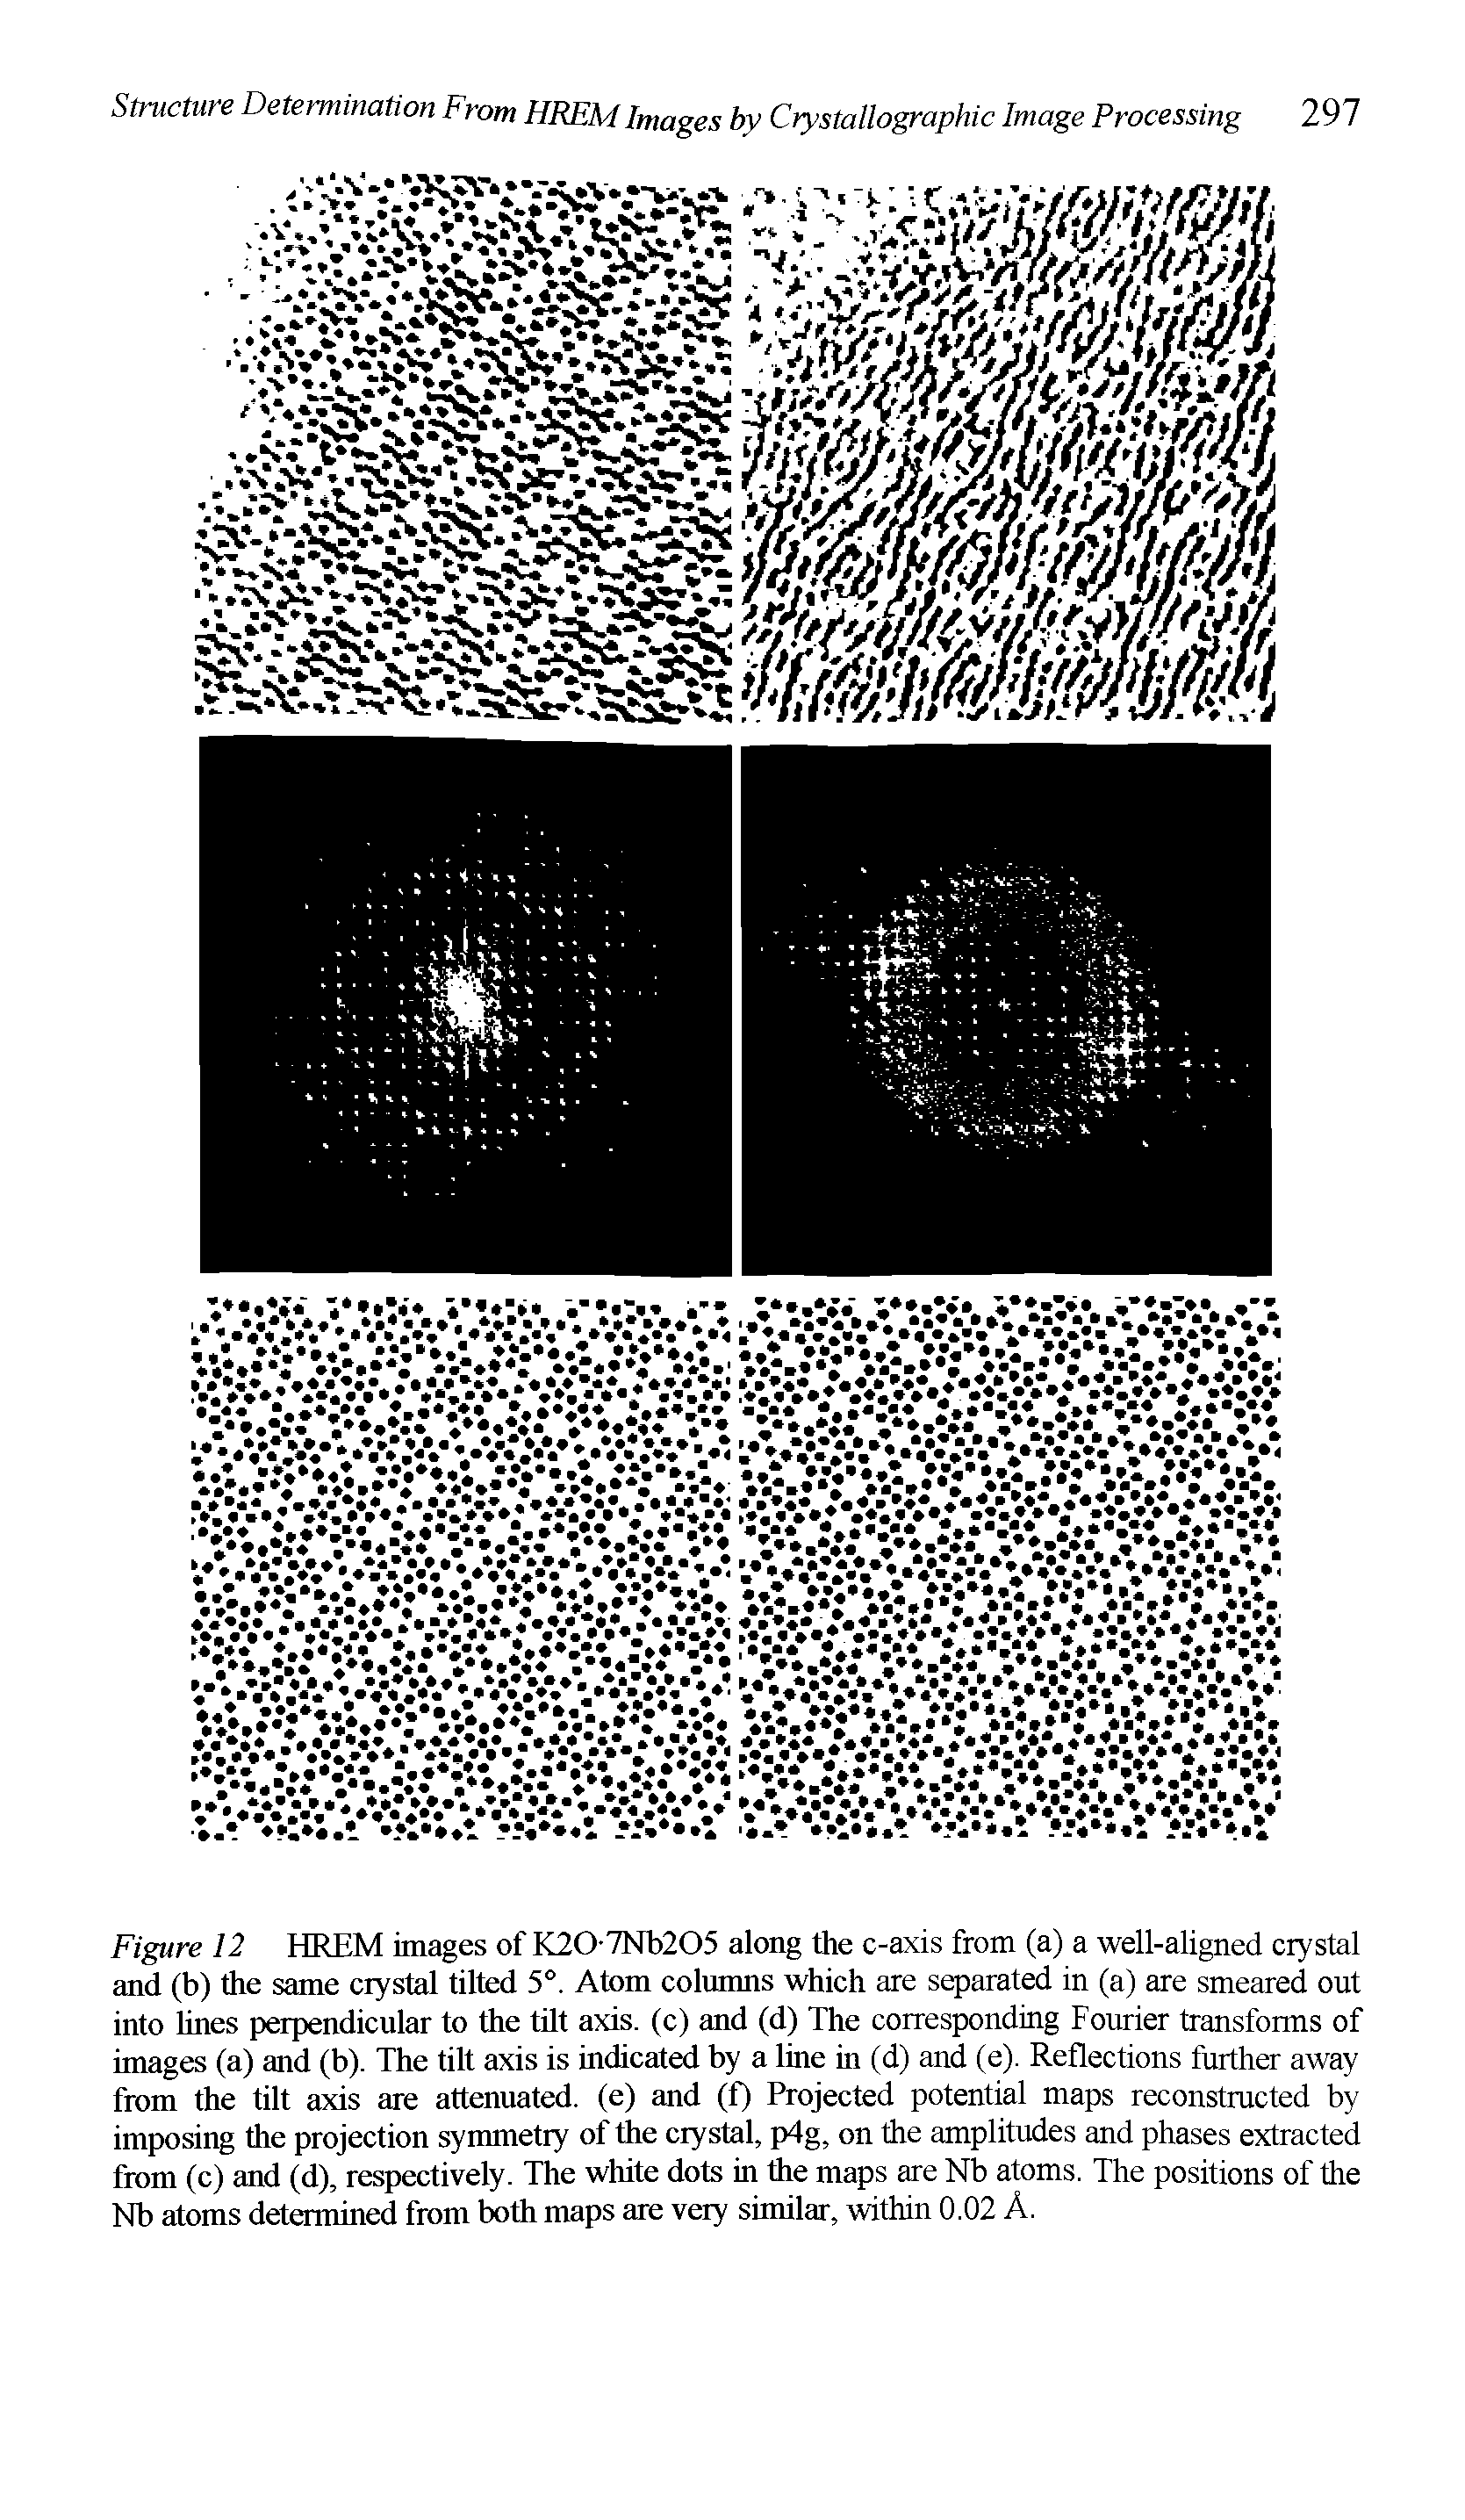 Figure 12 HREM images of K20-7Nb205 along the c-axis from (a) a well-aligned crystal and (b) the same crystal tilted 5°. Atom columns which are separated in (a) are smeared out into lines perpendicular to the tilt axis, (c) and (d) The corresponding Fourier transforms of images (a) and (b). The tilt axis is indicated by a line in (d) and (e). Reflections further away from the tilt axis are attenuated, (e) and (f) Projected potential maps reconstructed by imposing the projection symmetry of the crystal, p4g, on the amplitudes and phases extracted from (c) and (d), respectively. The white dots in the maps are Nb atoms. The positions of the Nb atoms determined from both maps are very similar, within 0.02 A.